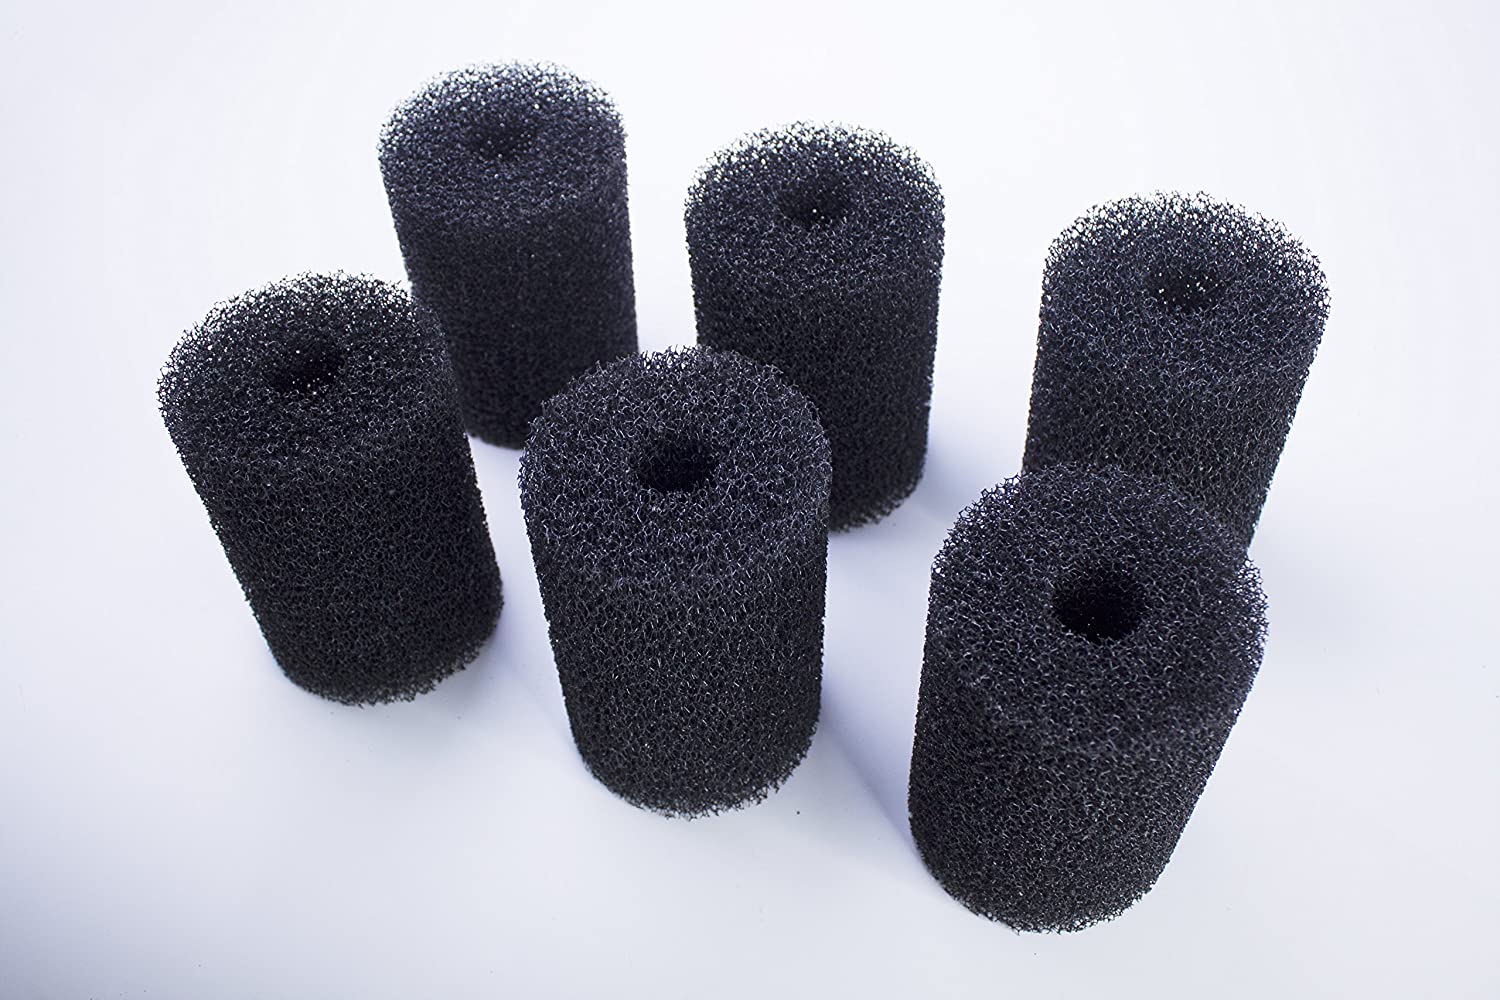 LTWHOME Pre-Filter Sponge Roll Fit for Tetra 19016 Pond FK3 Filtration Fountain Kit (Pack of 6)